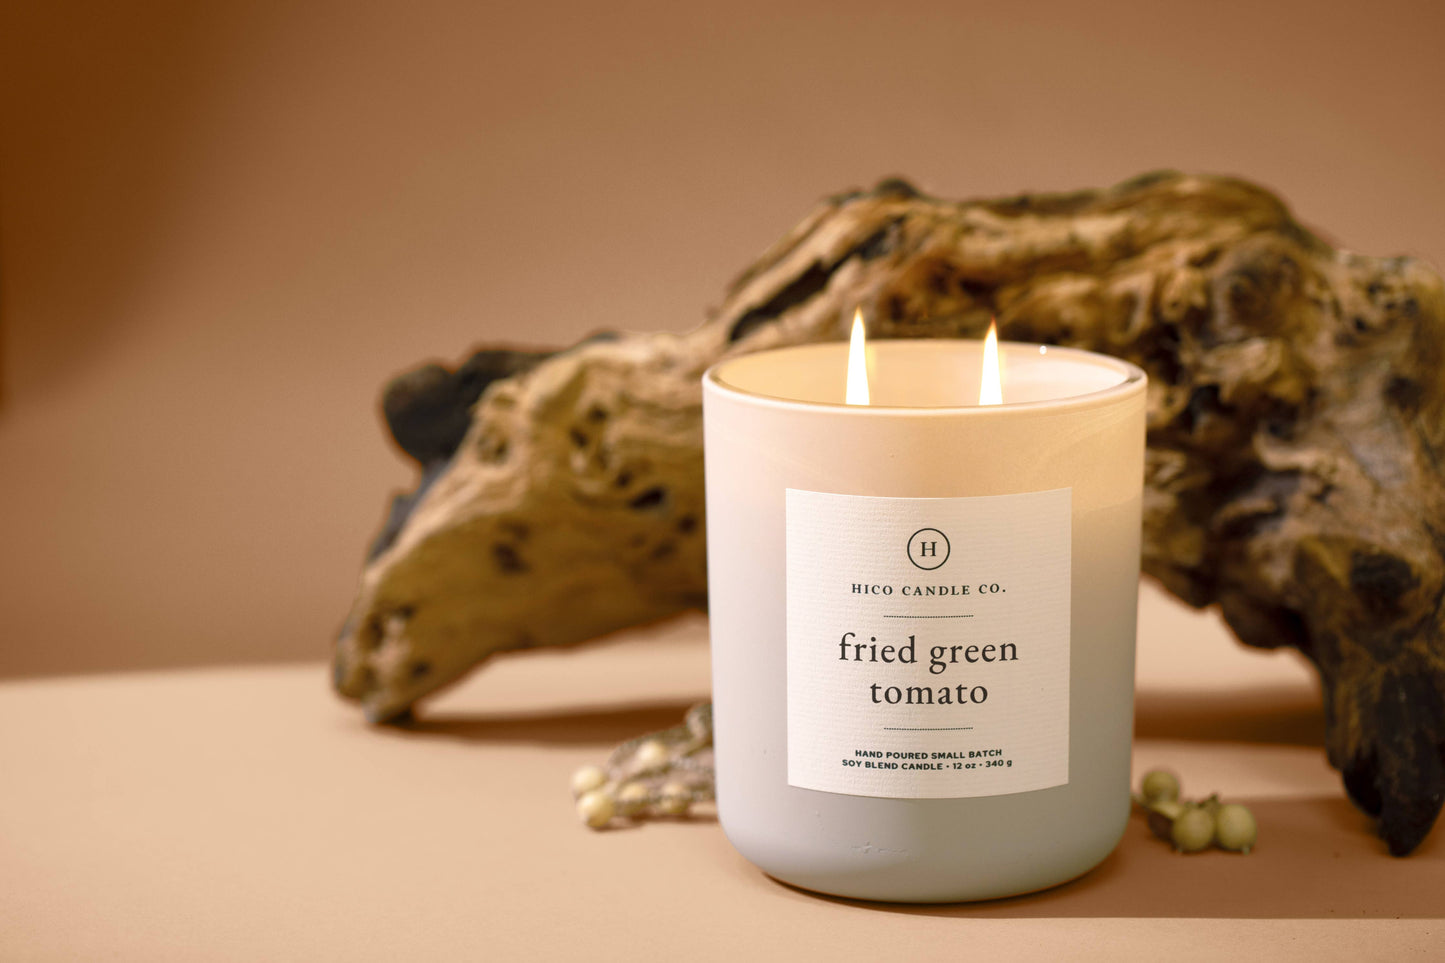 Hico Candle Co. - Fried Green Tomato Candle